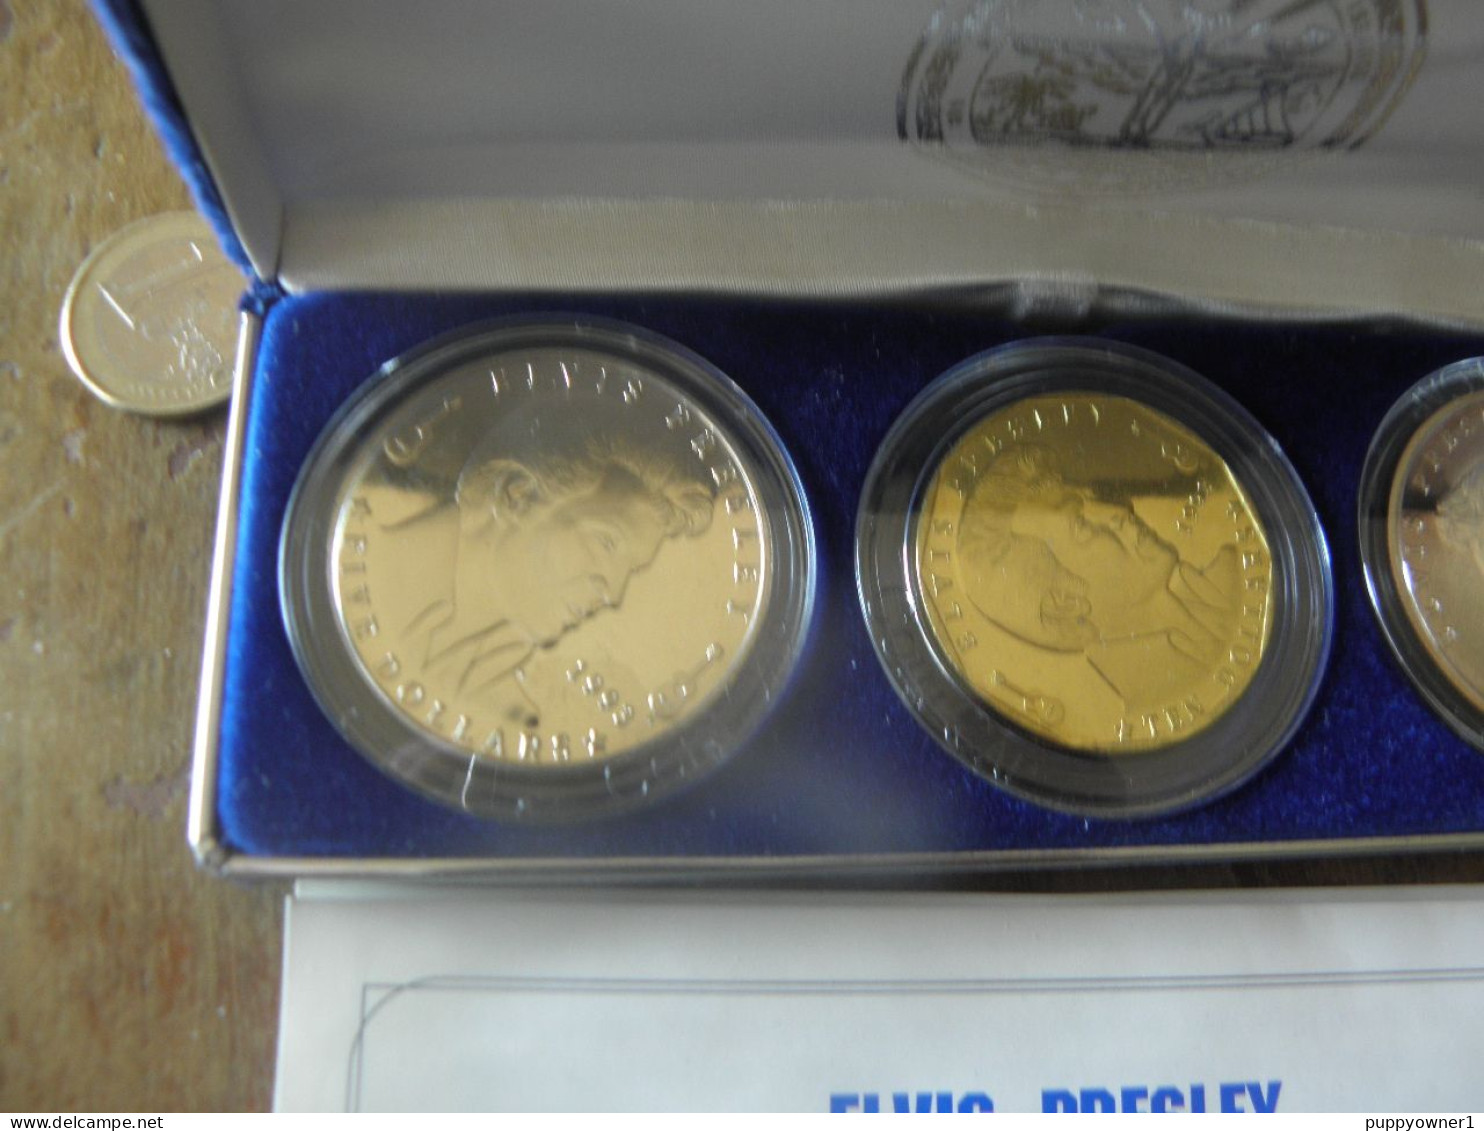 50$ argent troy ounce .999 10 $ laiton 5 $ cupronickel1993 Île Marshall Elvis Presley Coffret